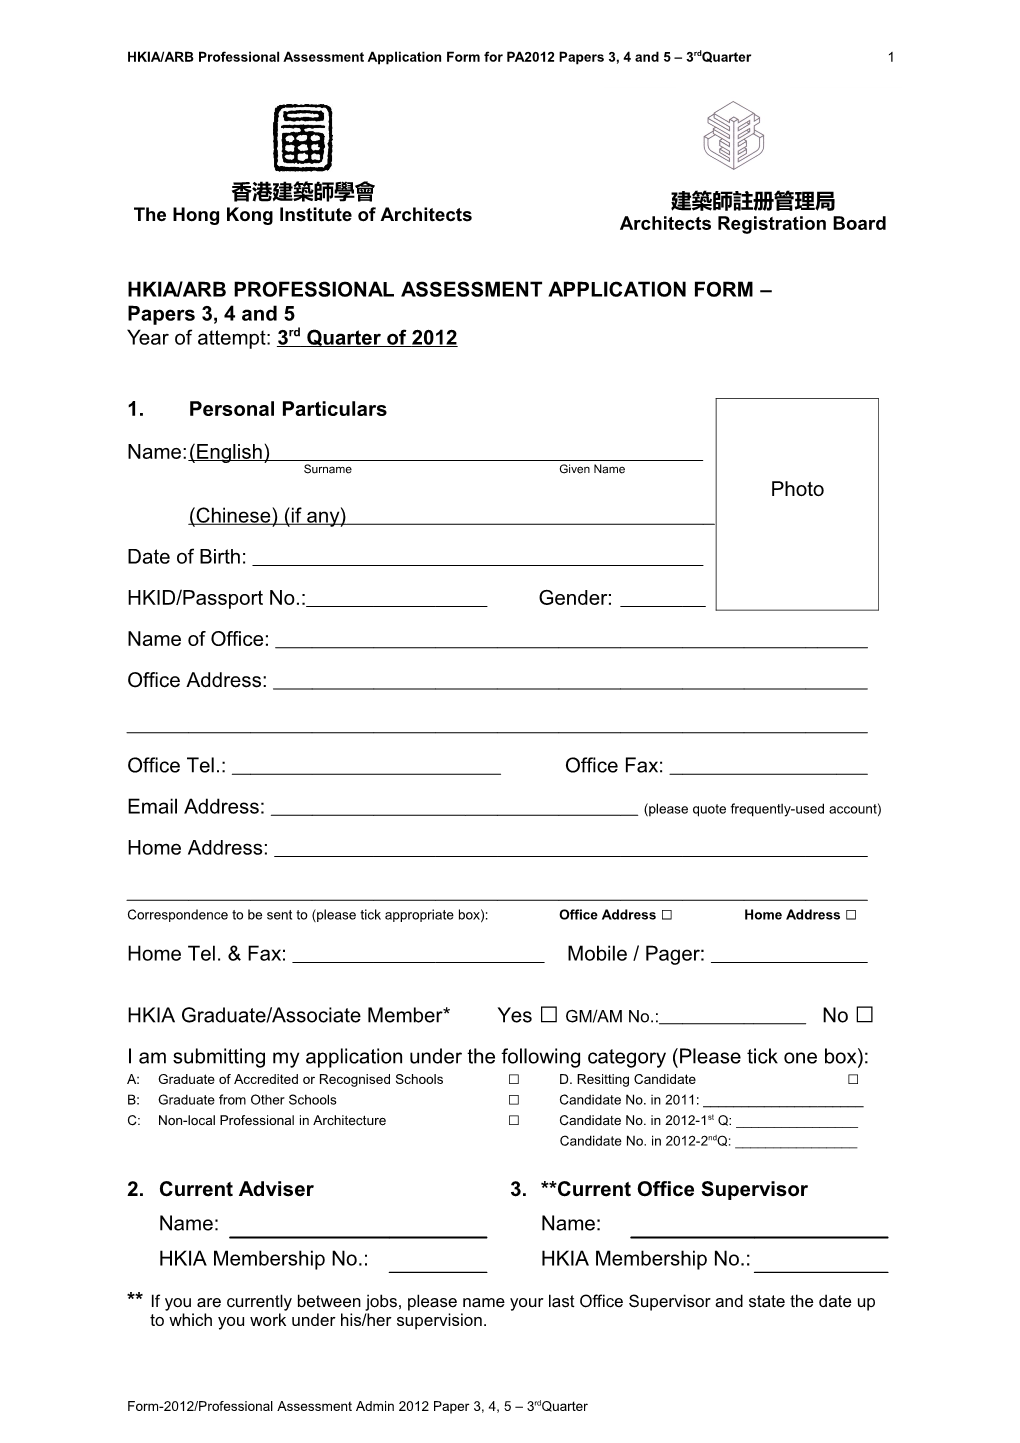 HKIA/ARB Professional Assessment Application Form for PA2012 Papers 3, 4 and 5 3Rdquarter 12